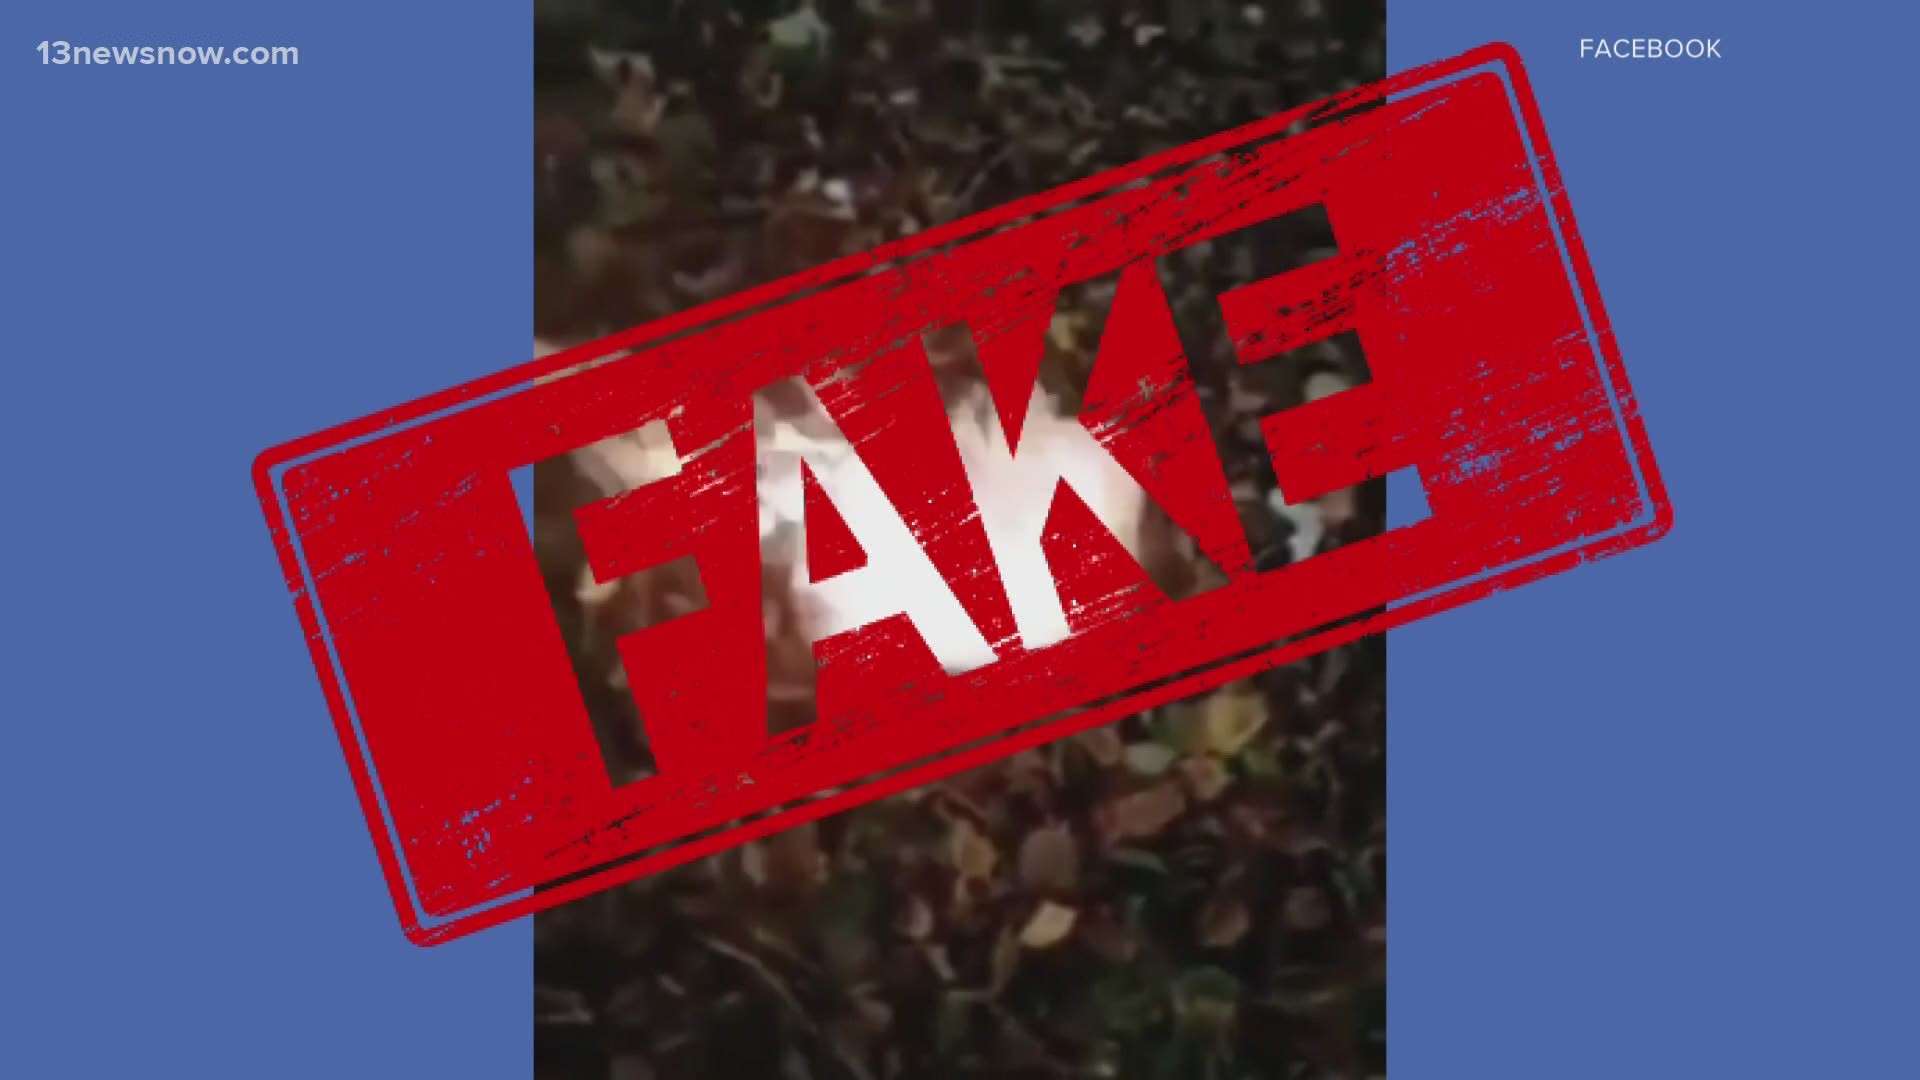 An election video that has been making waves on Facebook and Twitter is now being called fake.